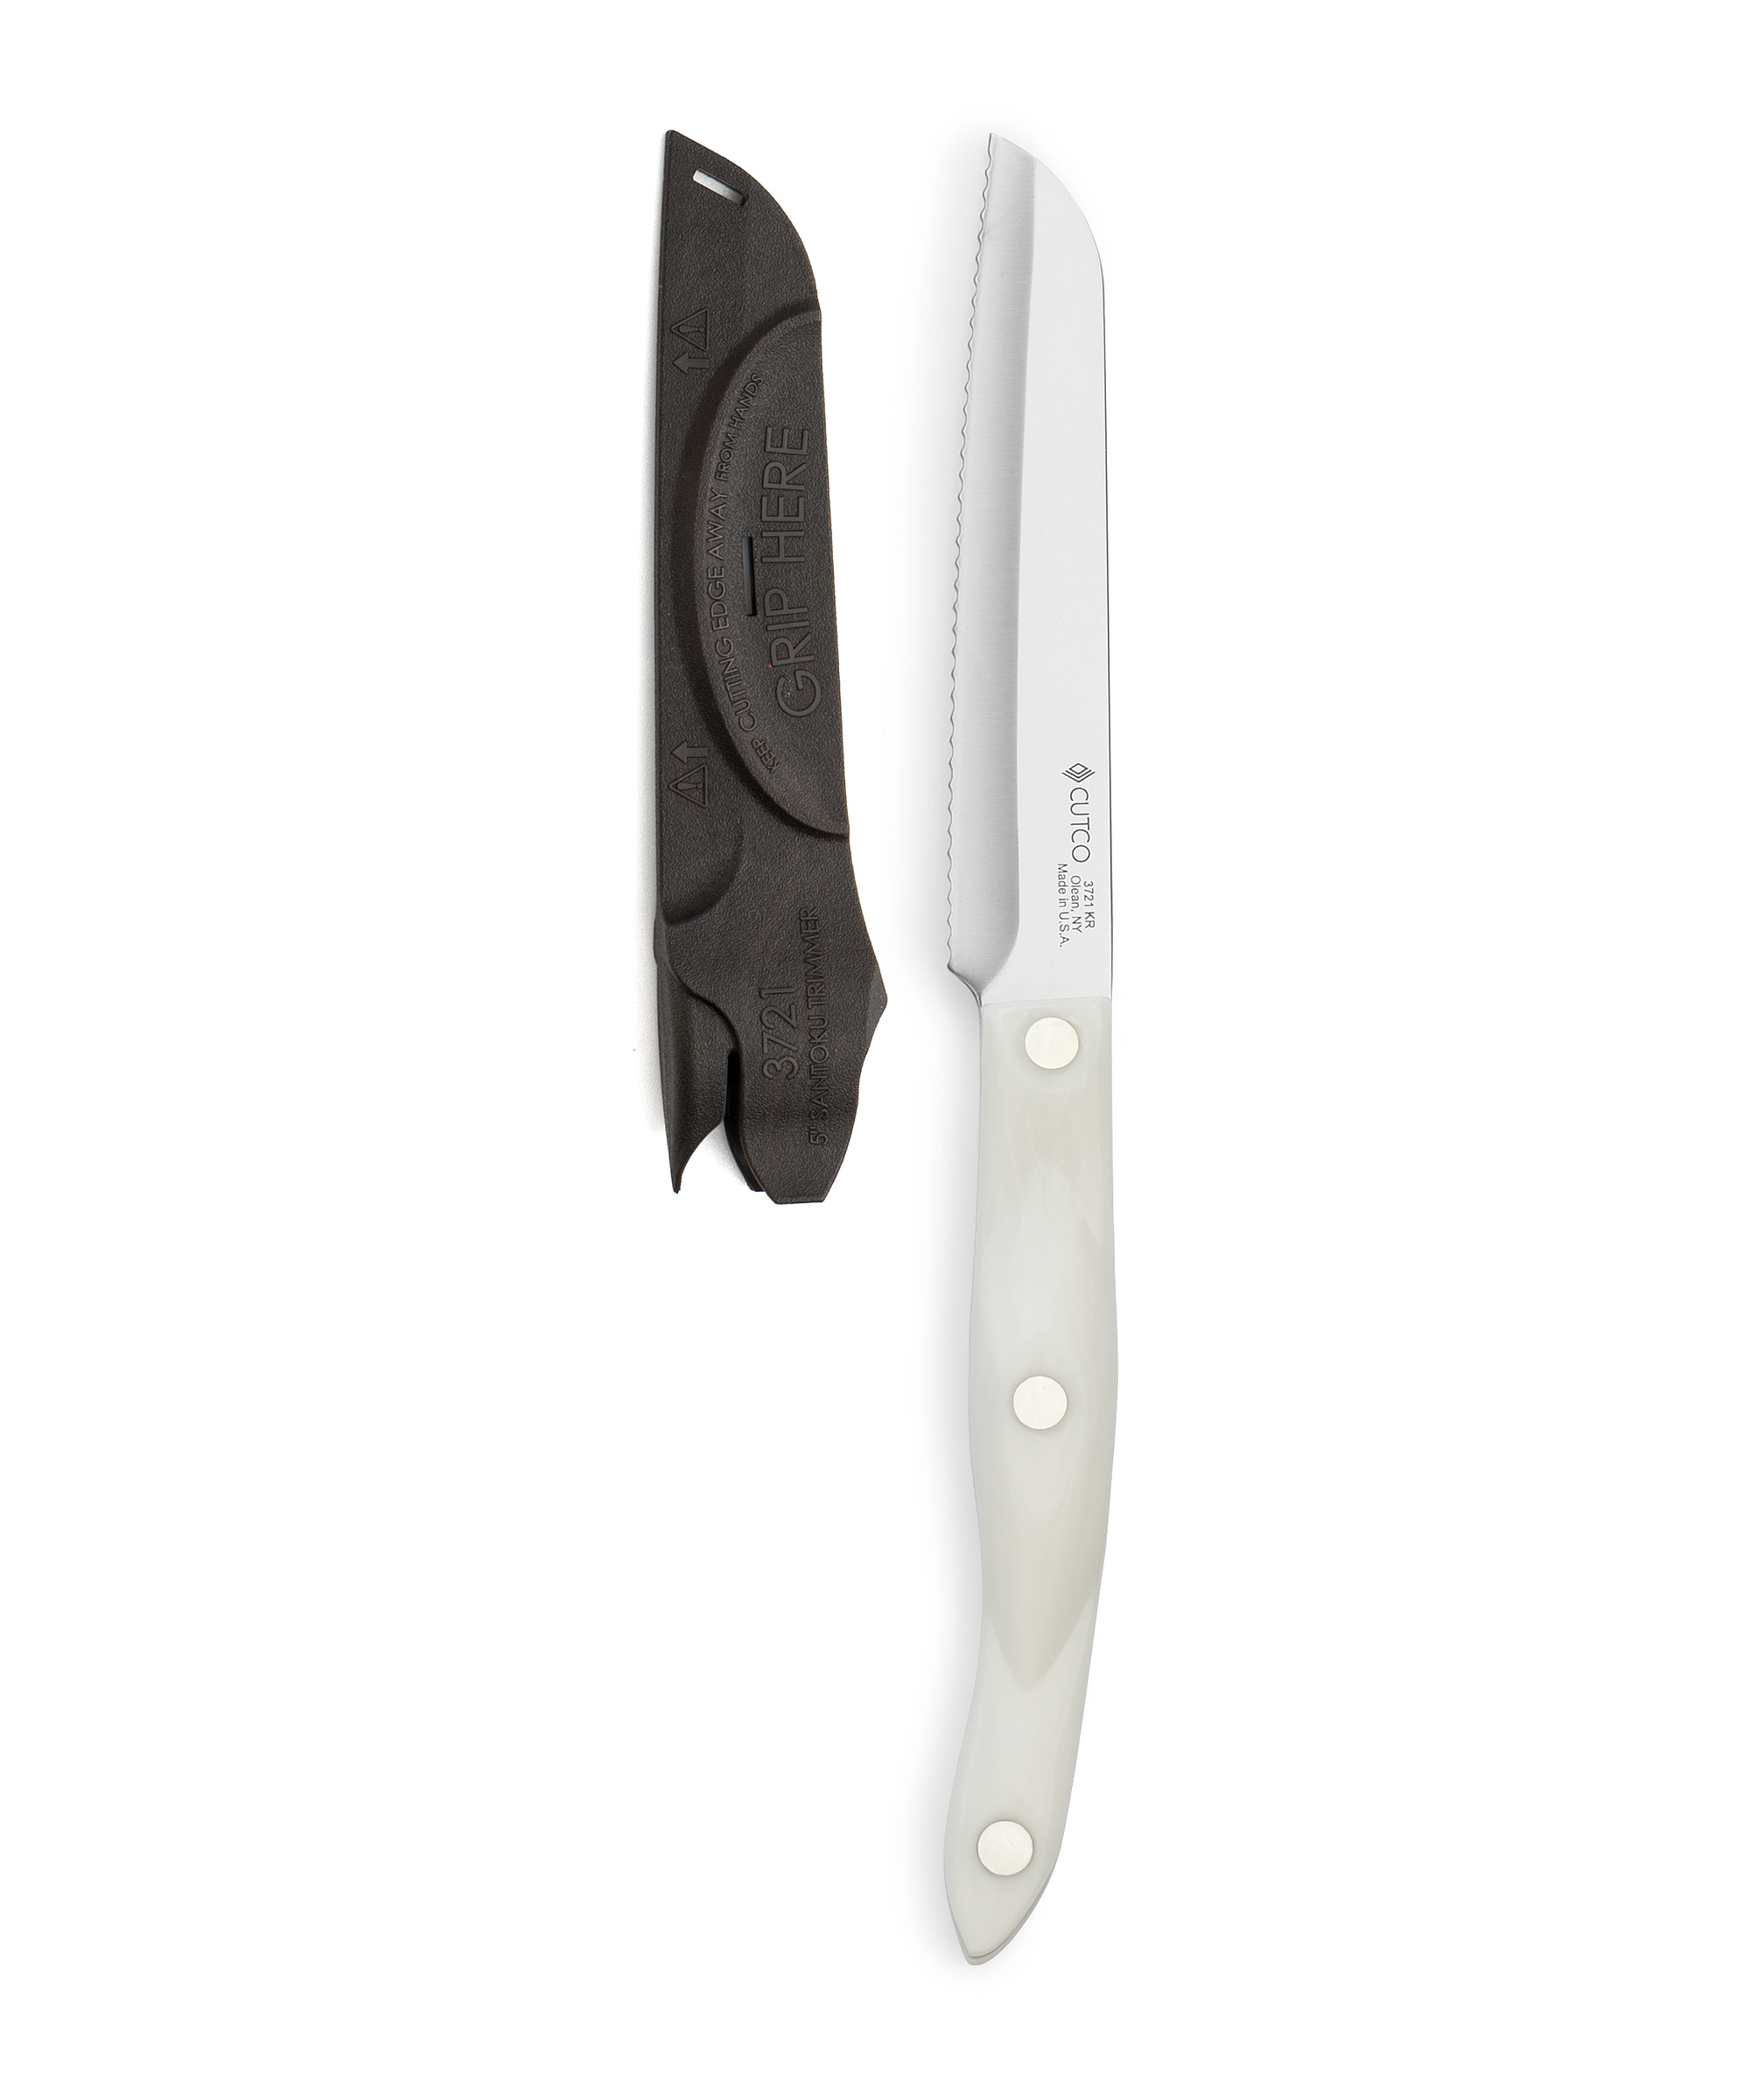 Cutco Model 3729 Santoku-Style Carver with 8.2 Double-D Serrated Edge Blade and 5.5 Classic Dark